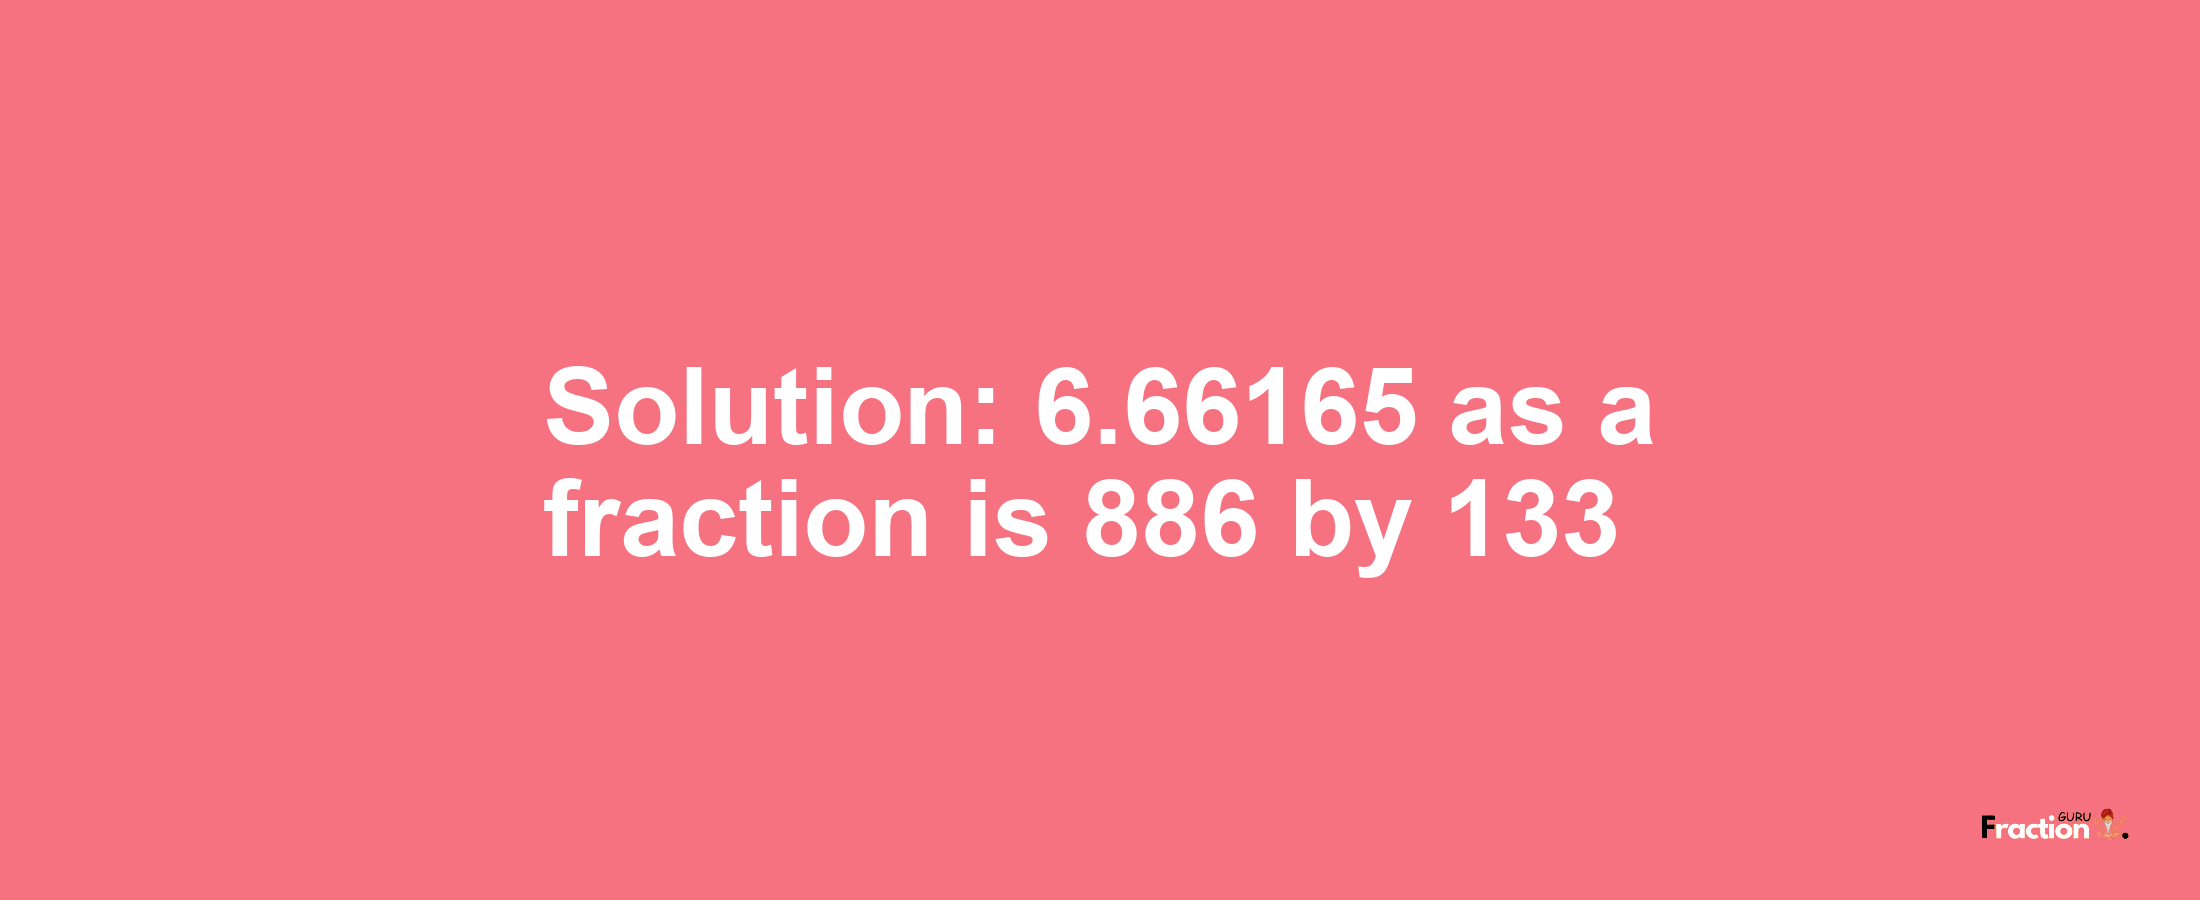 Solution:6.66165 as a fraction is 886/133